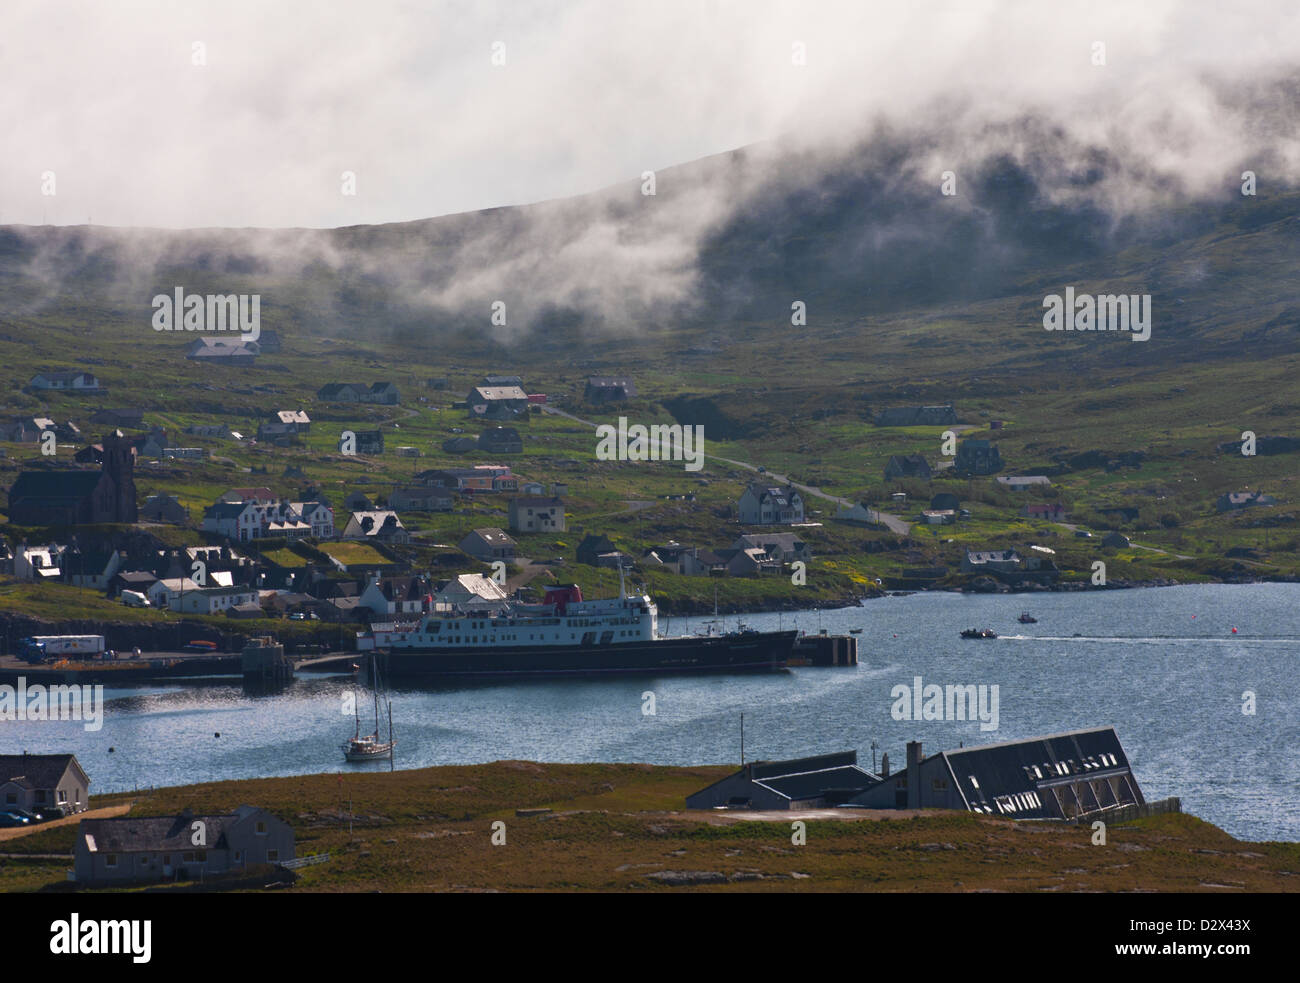 The town of Castlebay sits under Heaval Mountain on the Isle of Barra, Outer Hebrides, Western Isles, Scotland Stock Photo